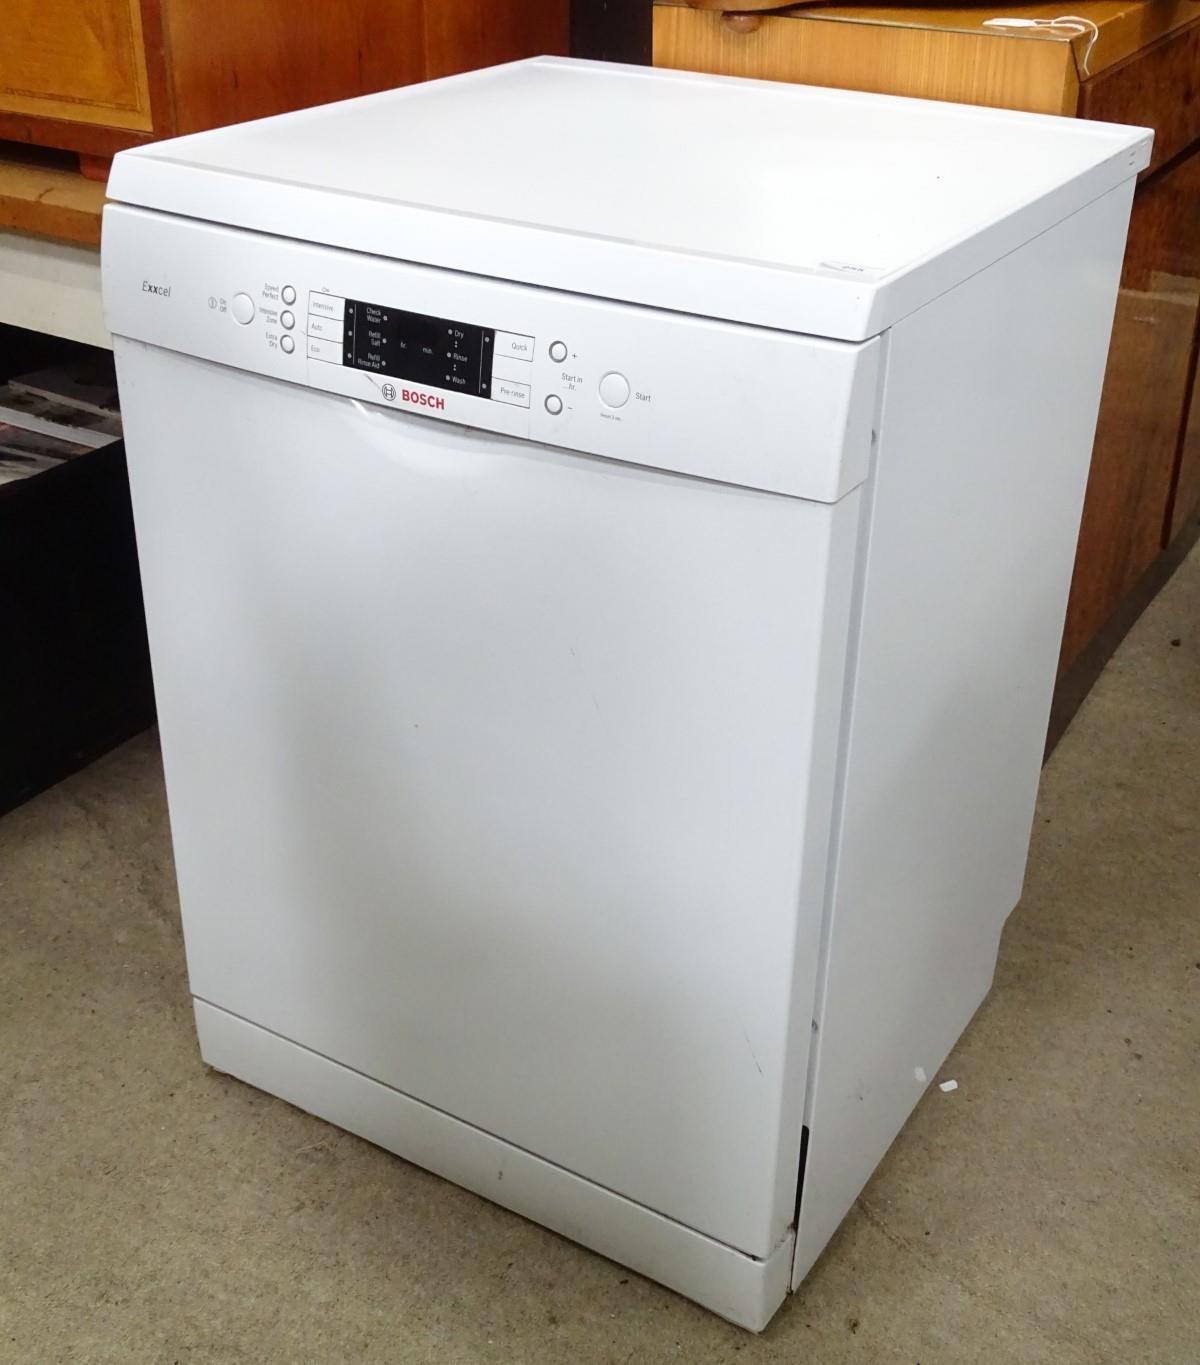 A Bosch exxcel dishwasher Please Note - we do not make reference to the condition of lots within